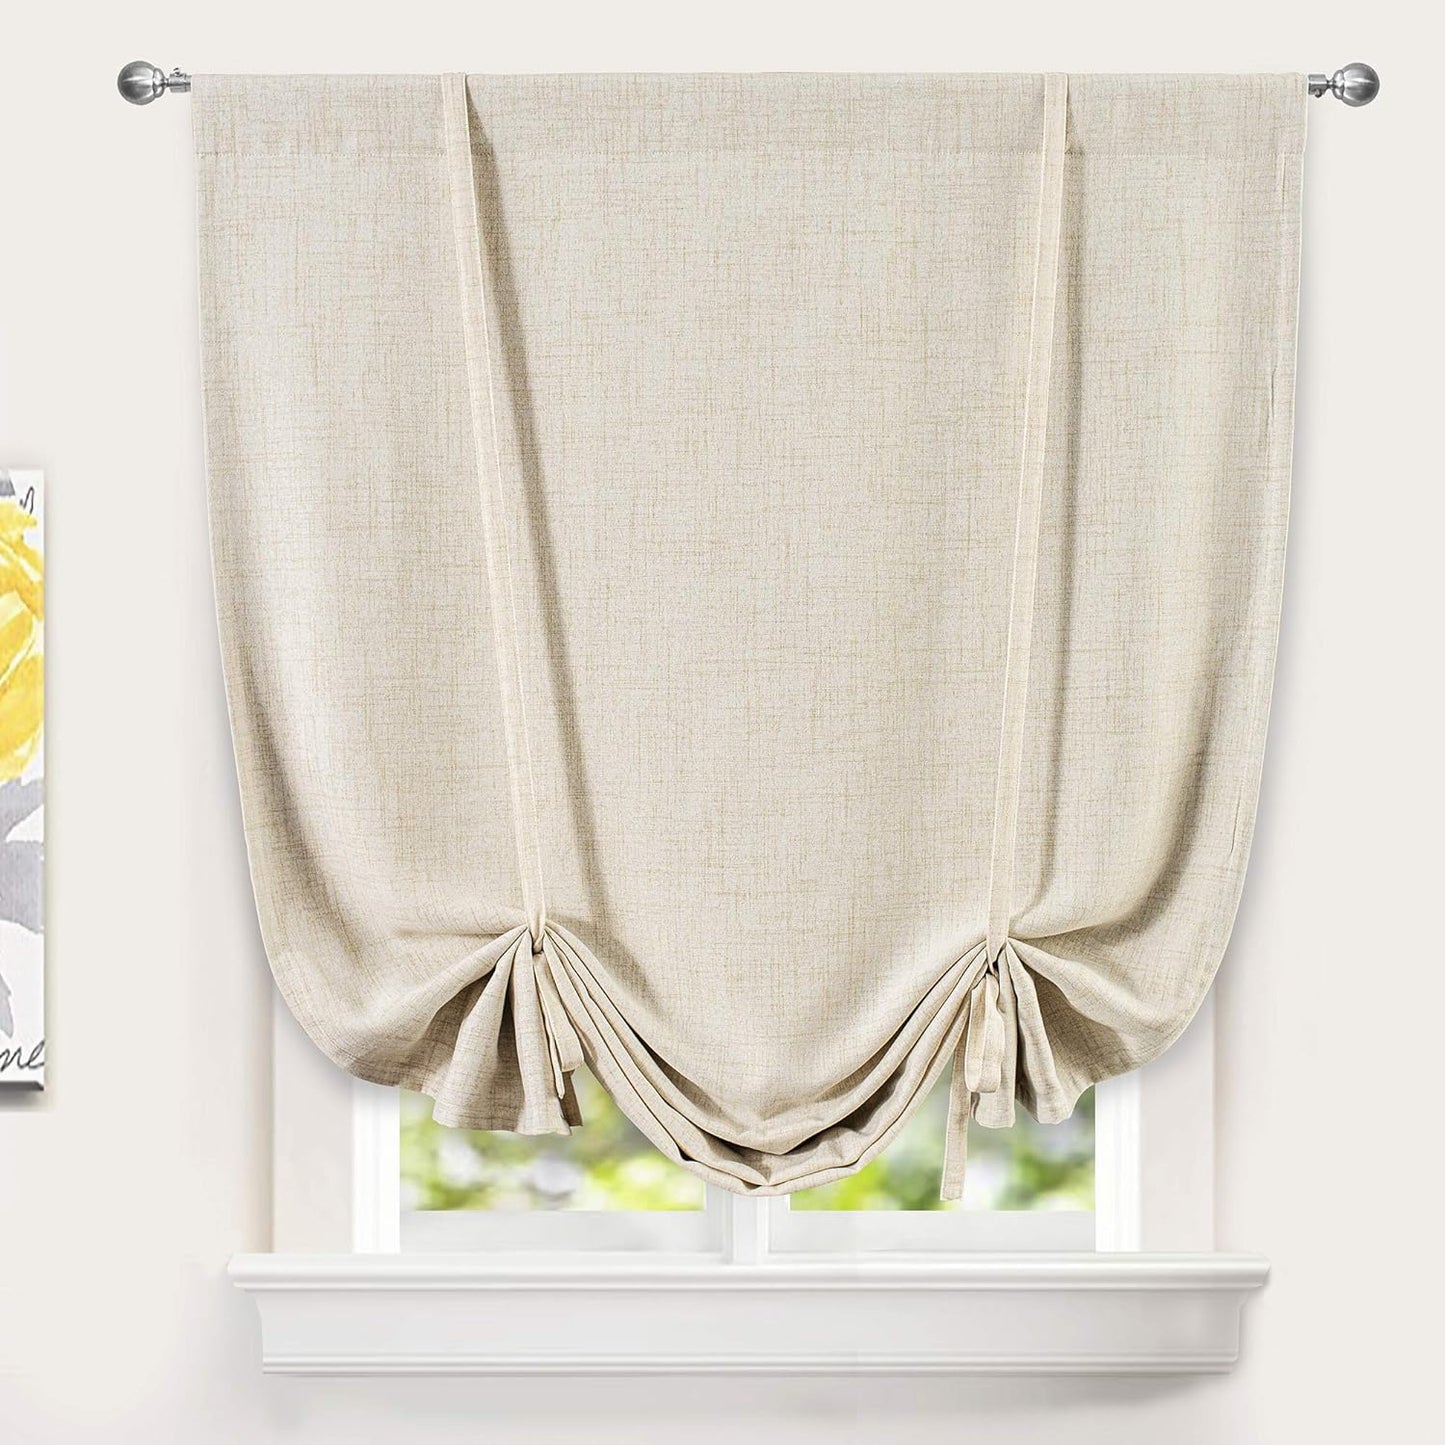 Driftaway Blackout Linen Textured Solid Basic Room Darkening Thermal Insulated Tie up Adjustable Balloon Rod Pocket Linen Curtains for Small Window 25 Inch by 47 Inch Light Linen  DriftAway Beige 45"X63" 